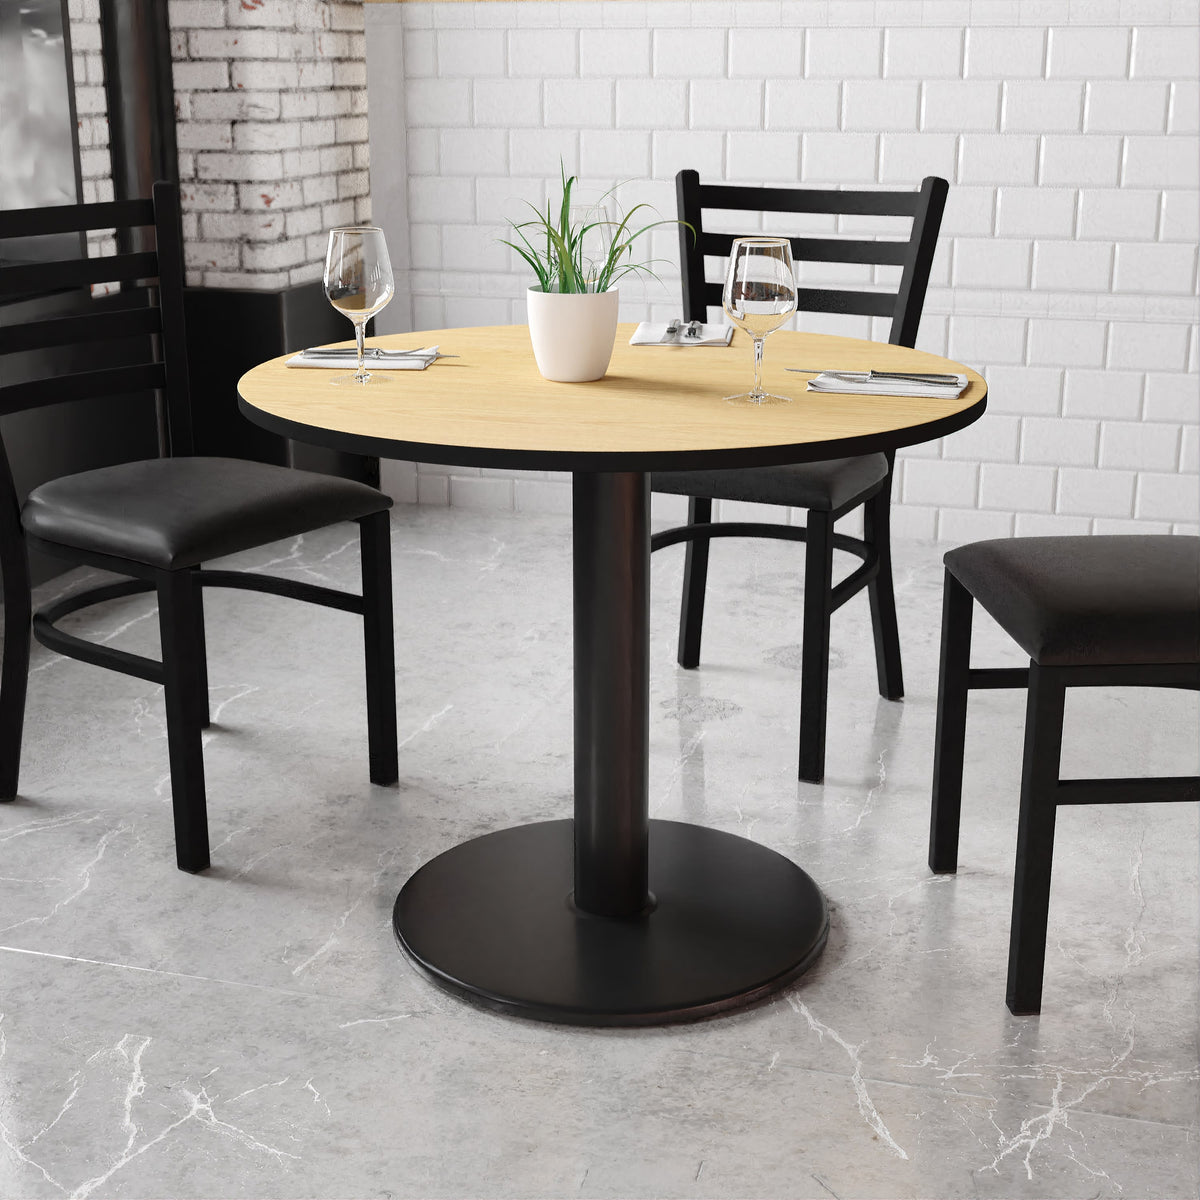 Natural |#| 36inch Round Natural Laminate Table Top with 24inch Round Table Height Base